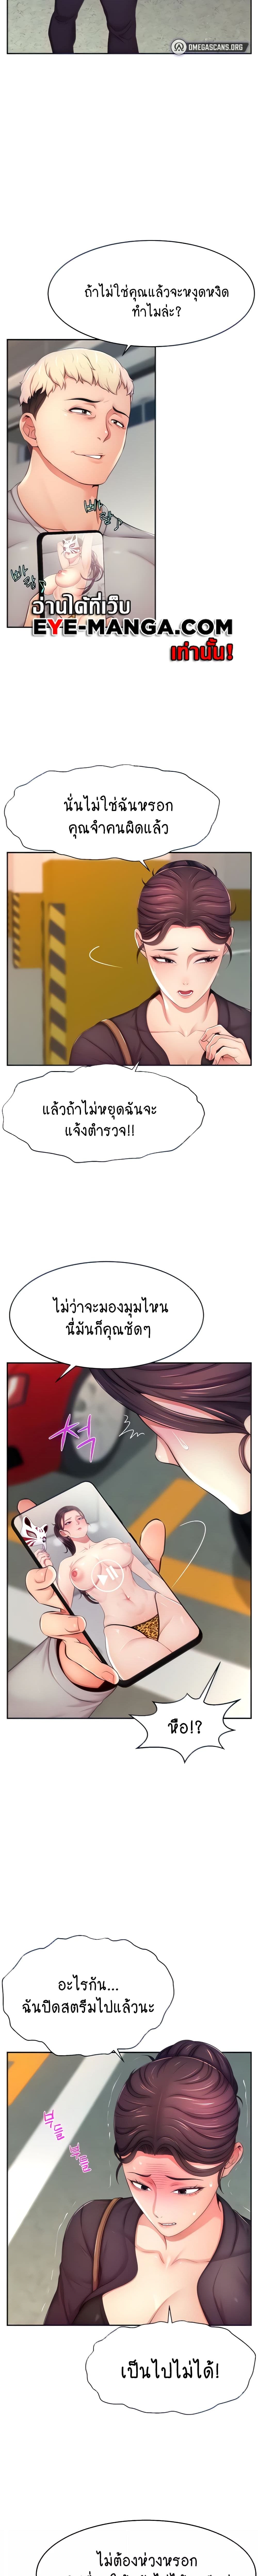 Making Friends With Streamers by Hacking! ตอนที่ 8 ภาพ 4